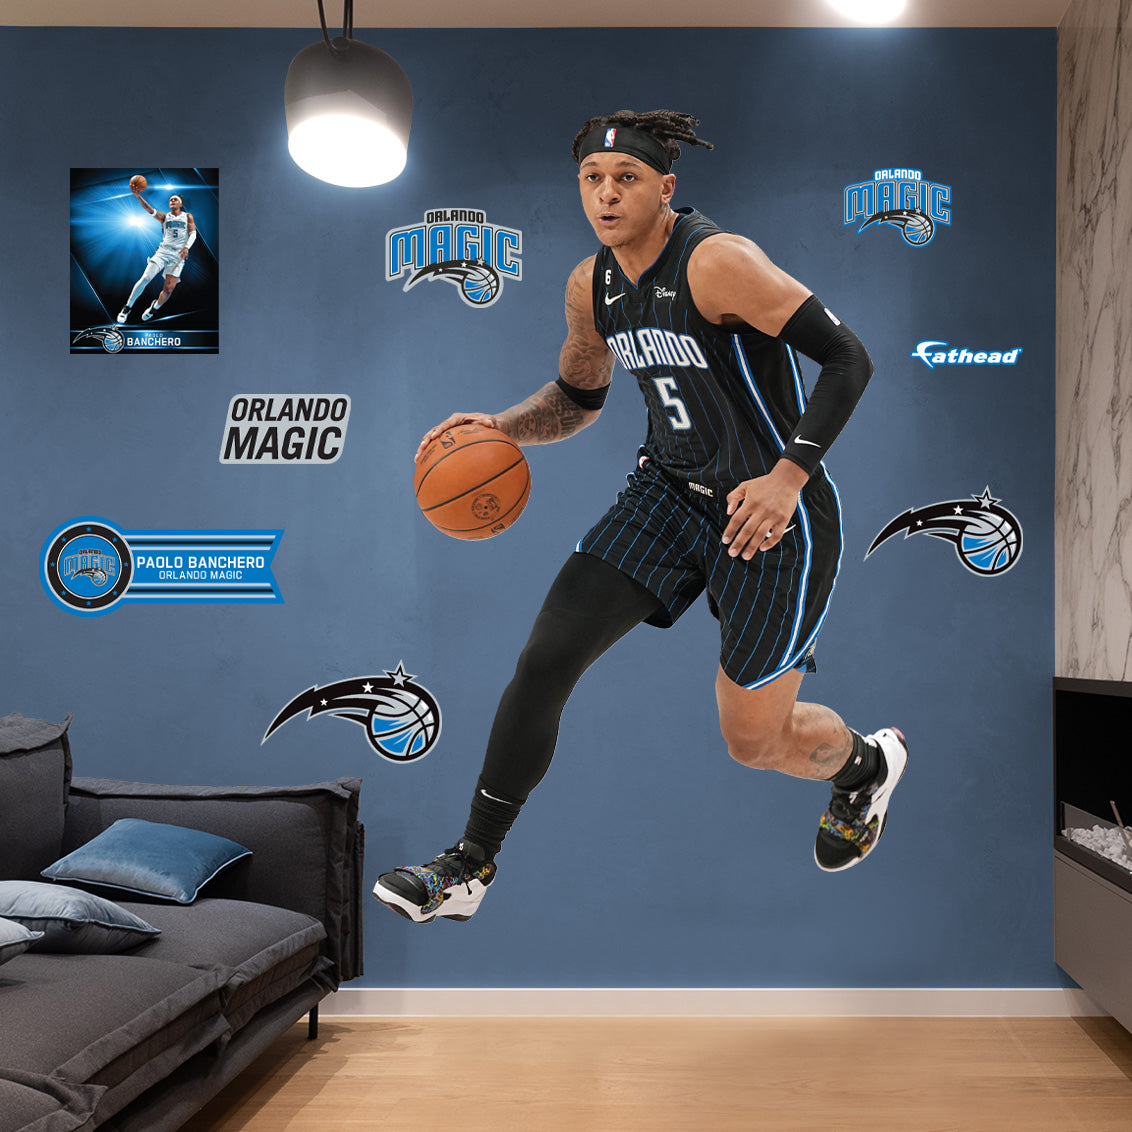 Orlando Magic: Paolo Banchero Icon Jersey - Officially Licensed NBA Removable Adhesive Decal